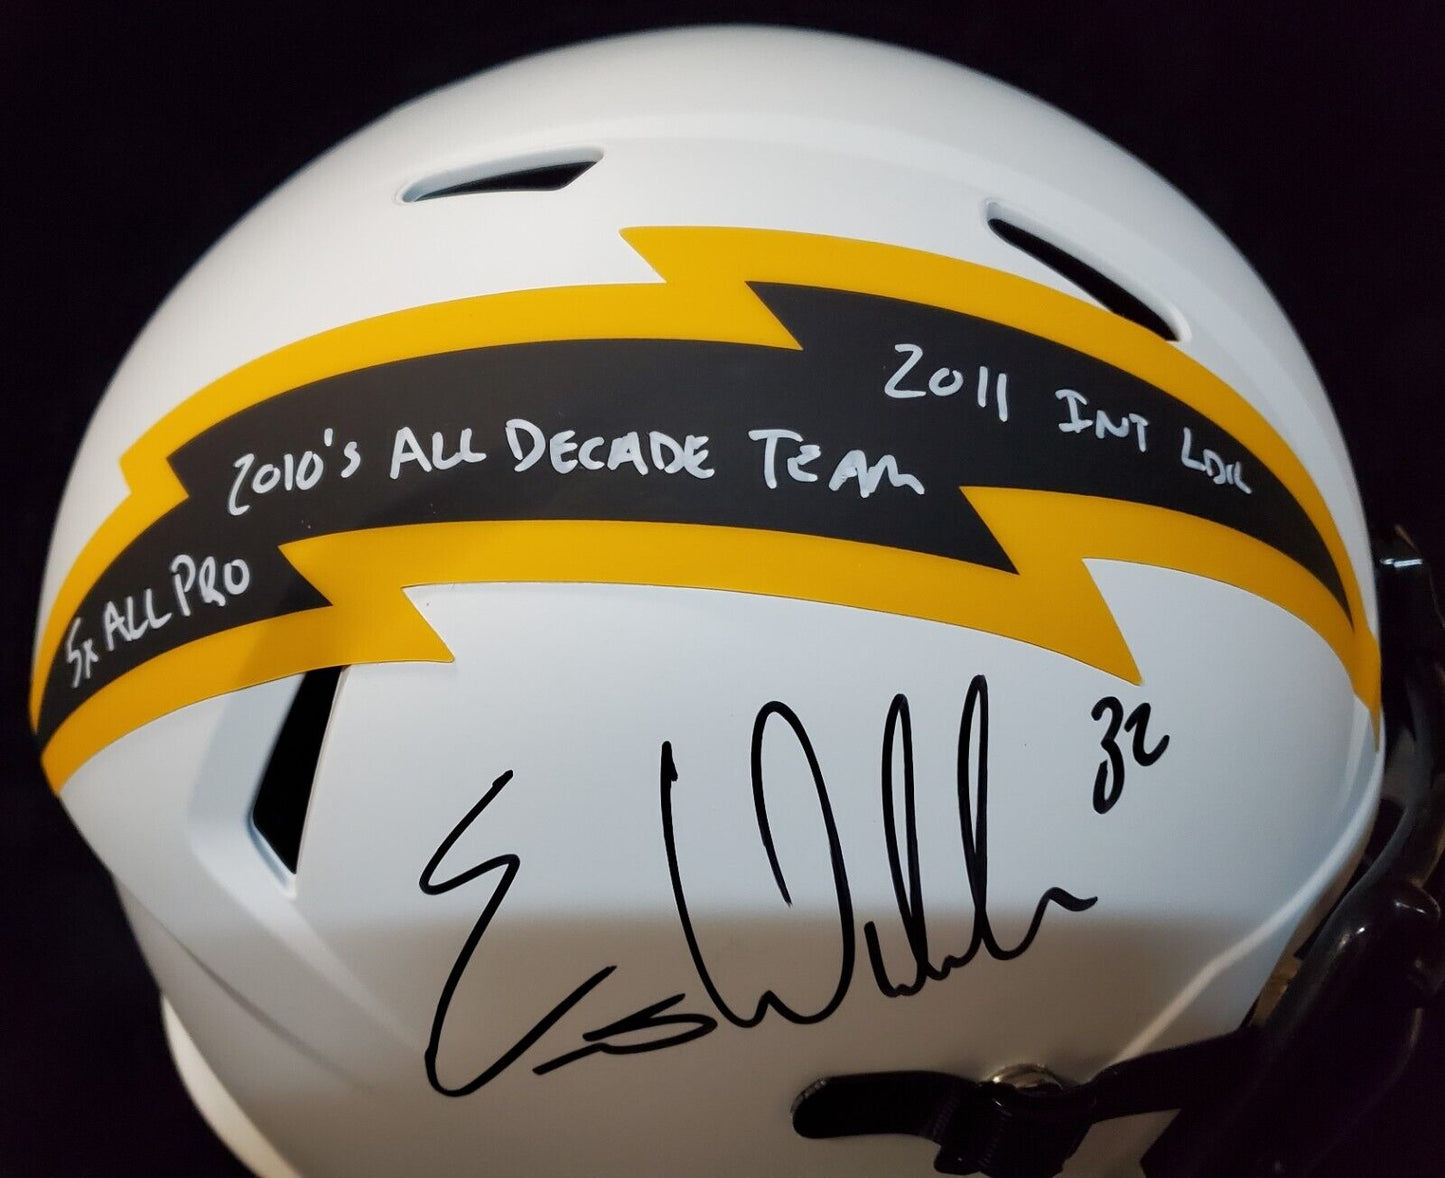 MVP Authentics San Diego Chargers Eric Weddle Signed 3X Insc Full Size Lunar Rep Helmet Jsa Coa 405 sports jersey framing , jersey framing